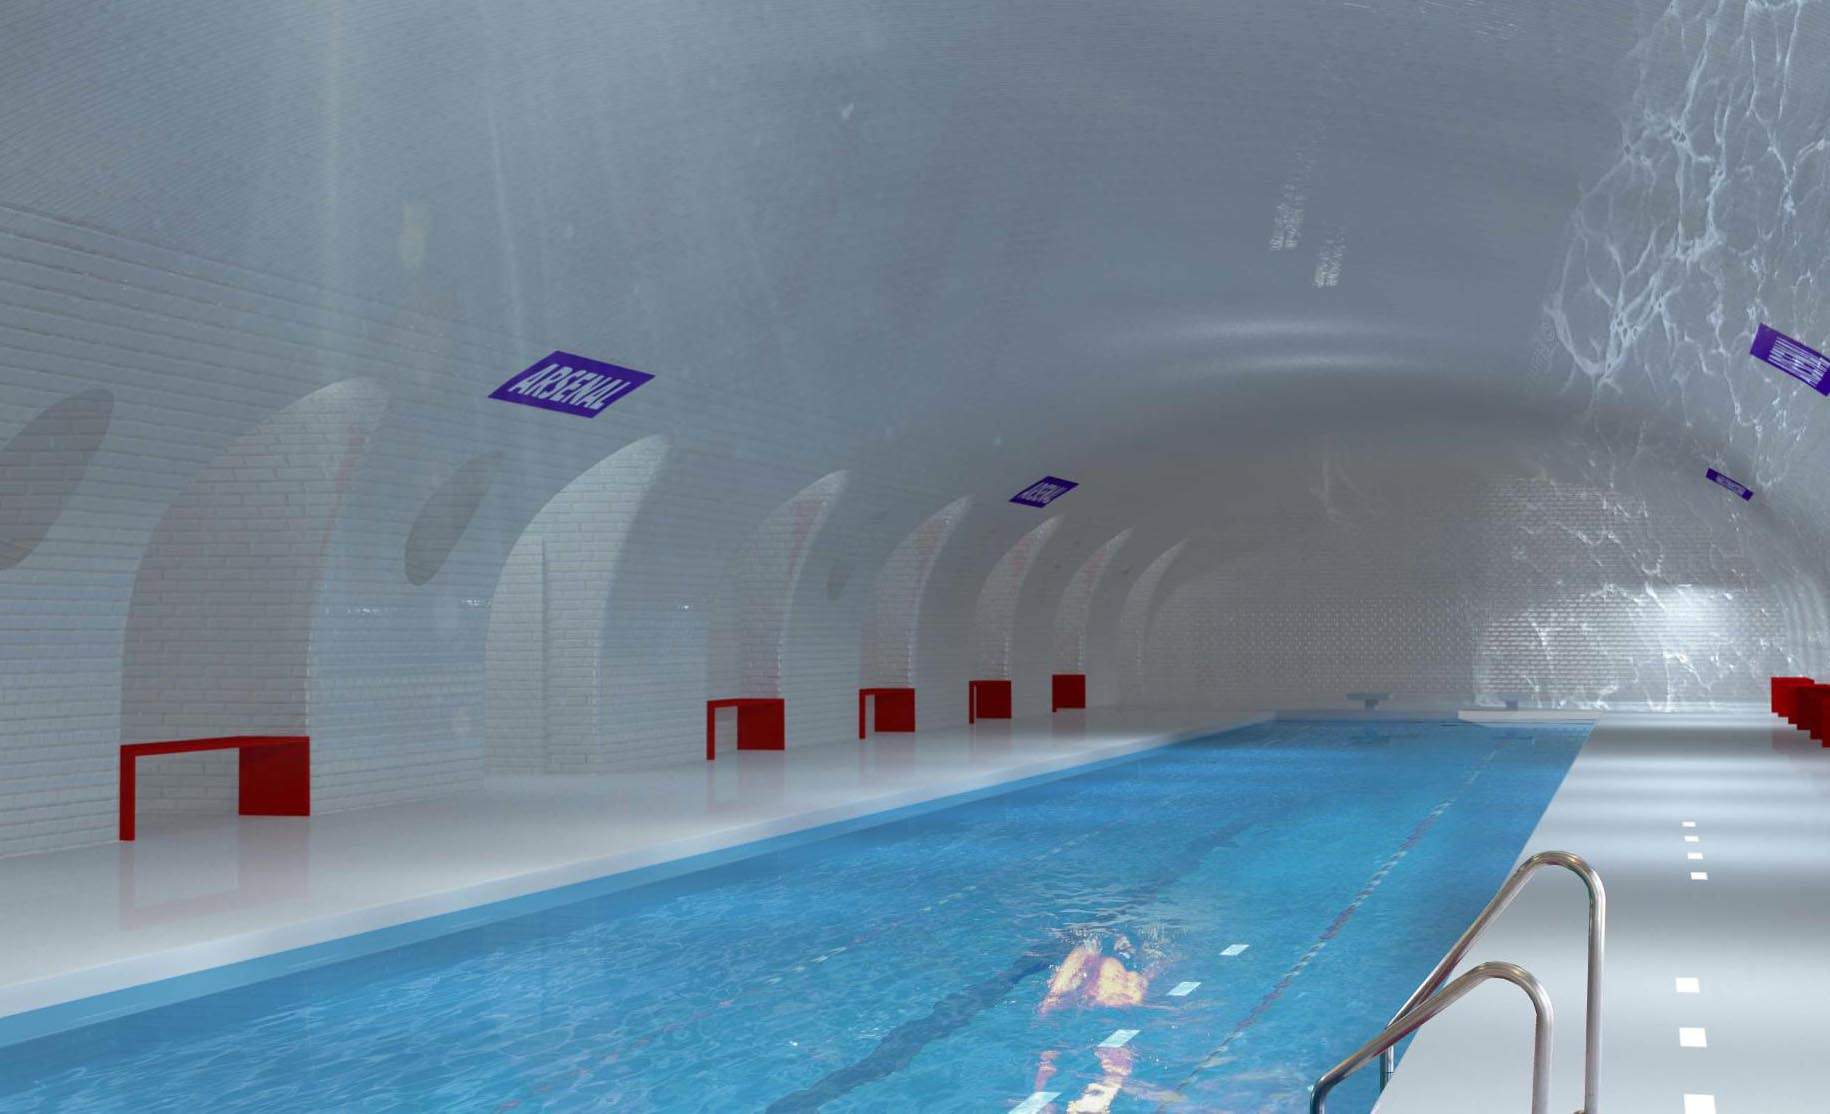 Abandoned Parisian Metro Stations Reimagined as Pools, Theatres and Clubs